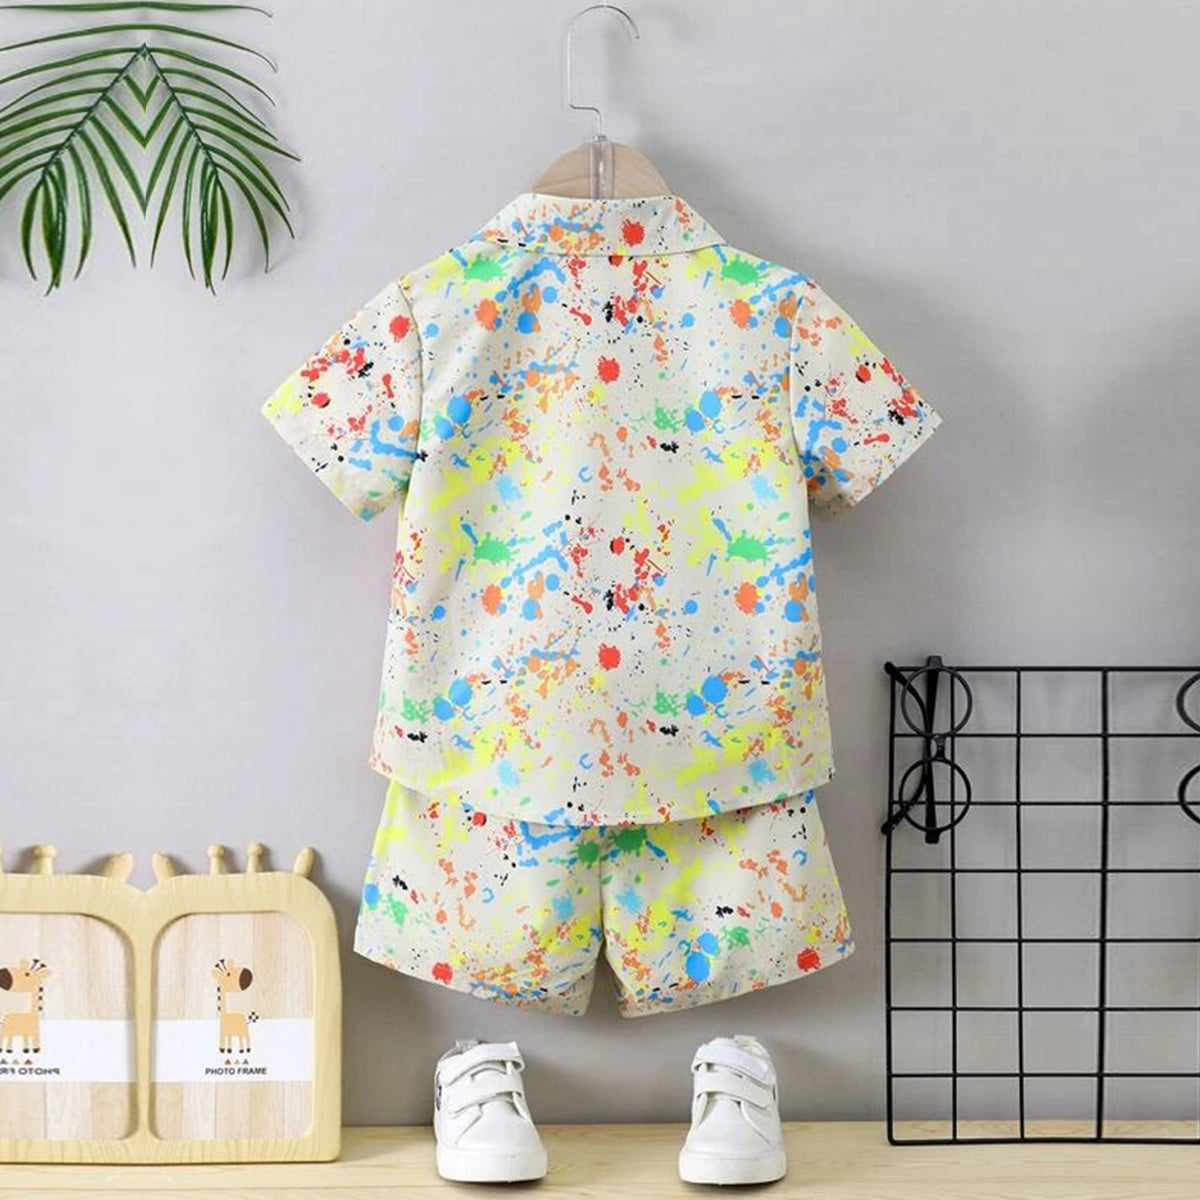 Venutaloza Boys Apricot-Colored Casual Printed Shirt & Shorts Without tee Two Piece Set.